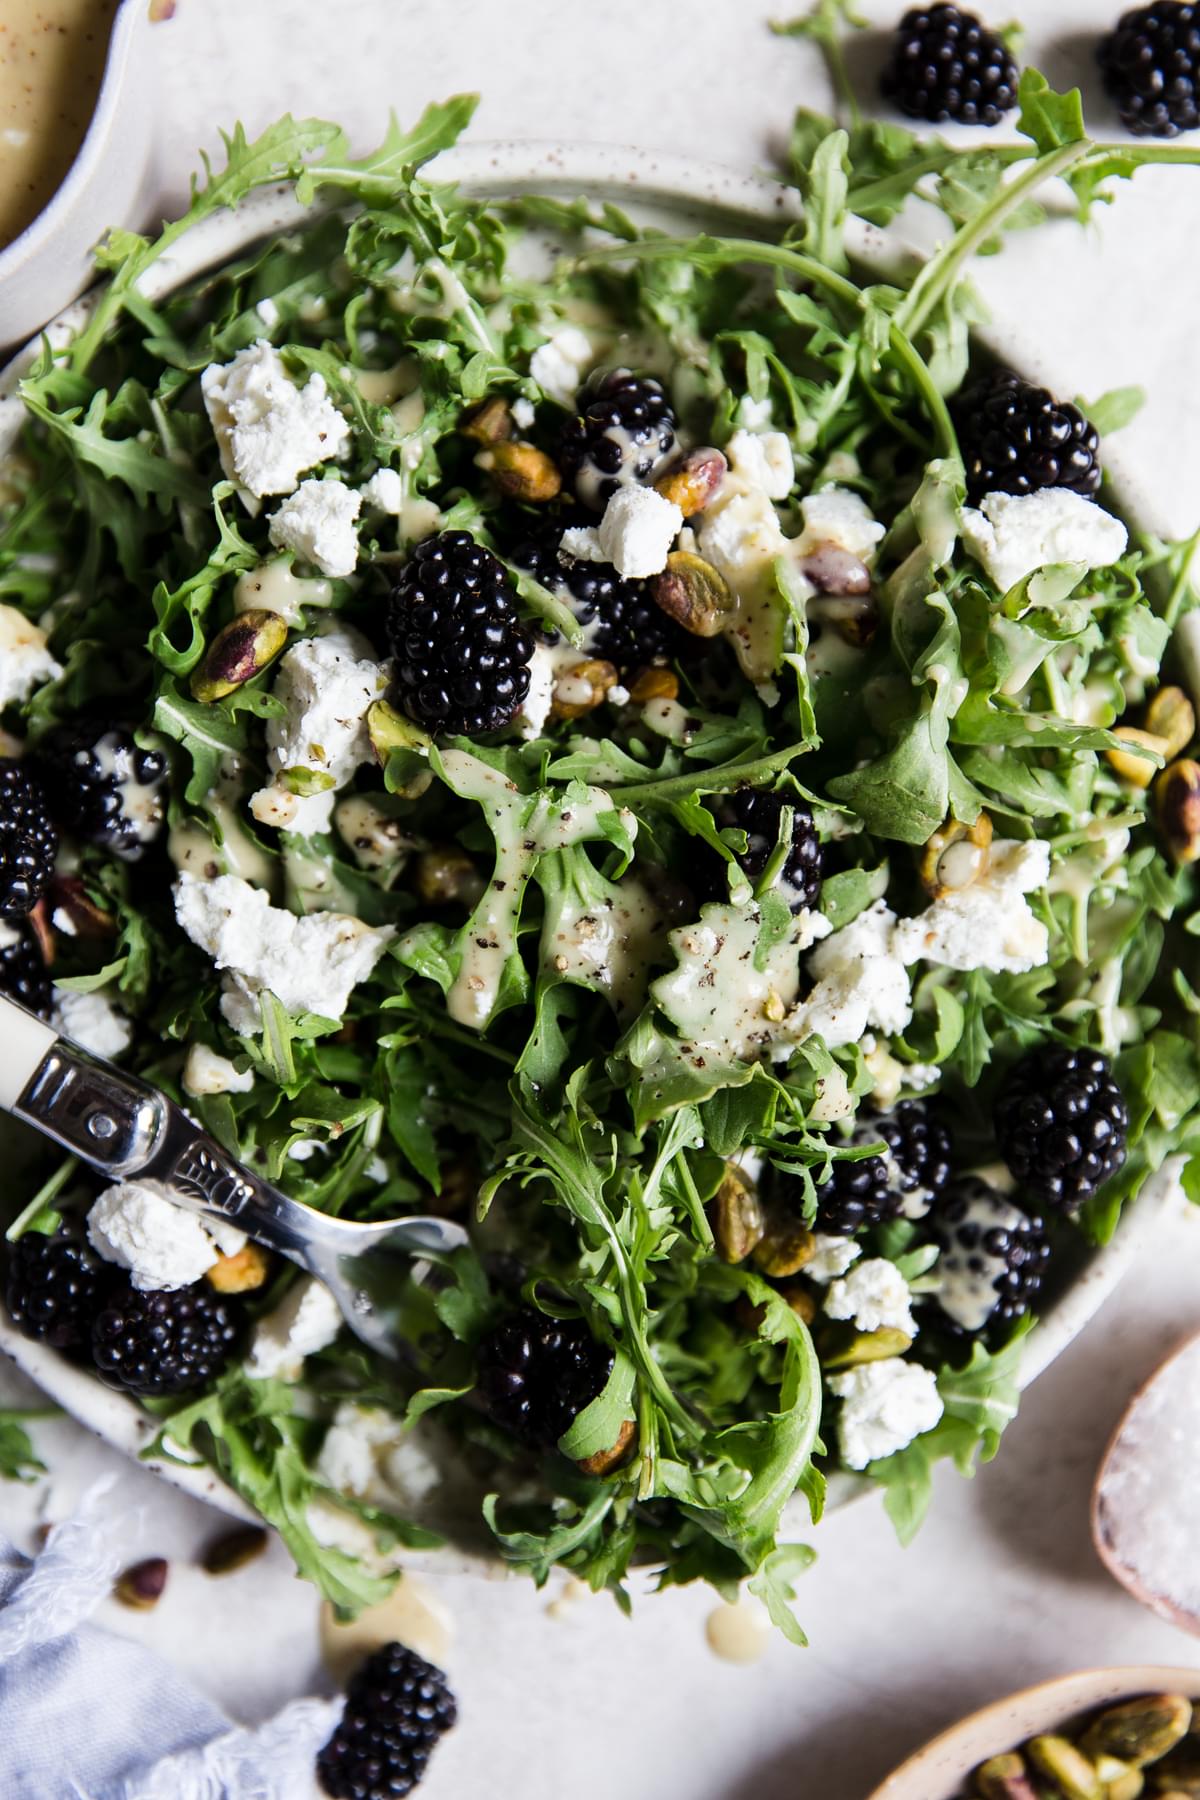 Arugula salad topped with blackberries, goat cheese, pistachios and honey mustard salad dressing on a plate